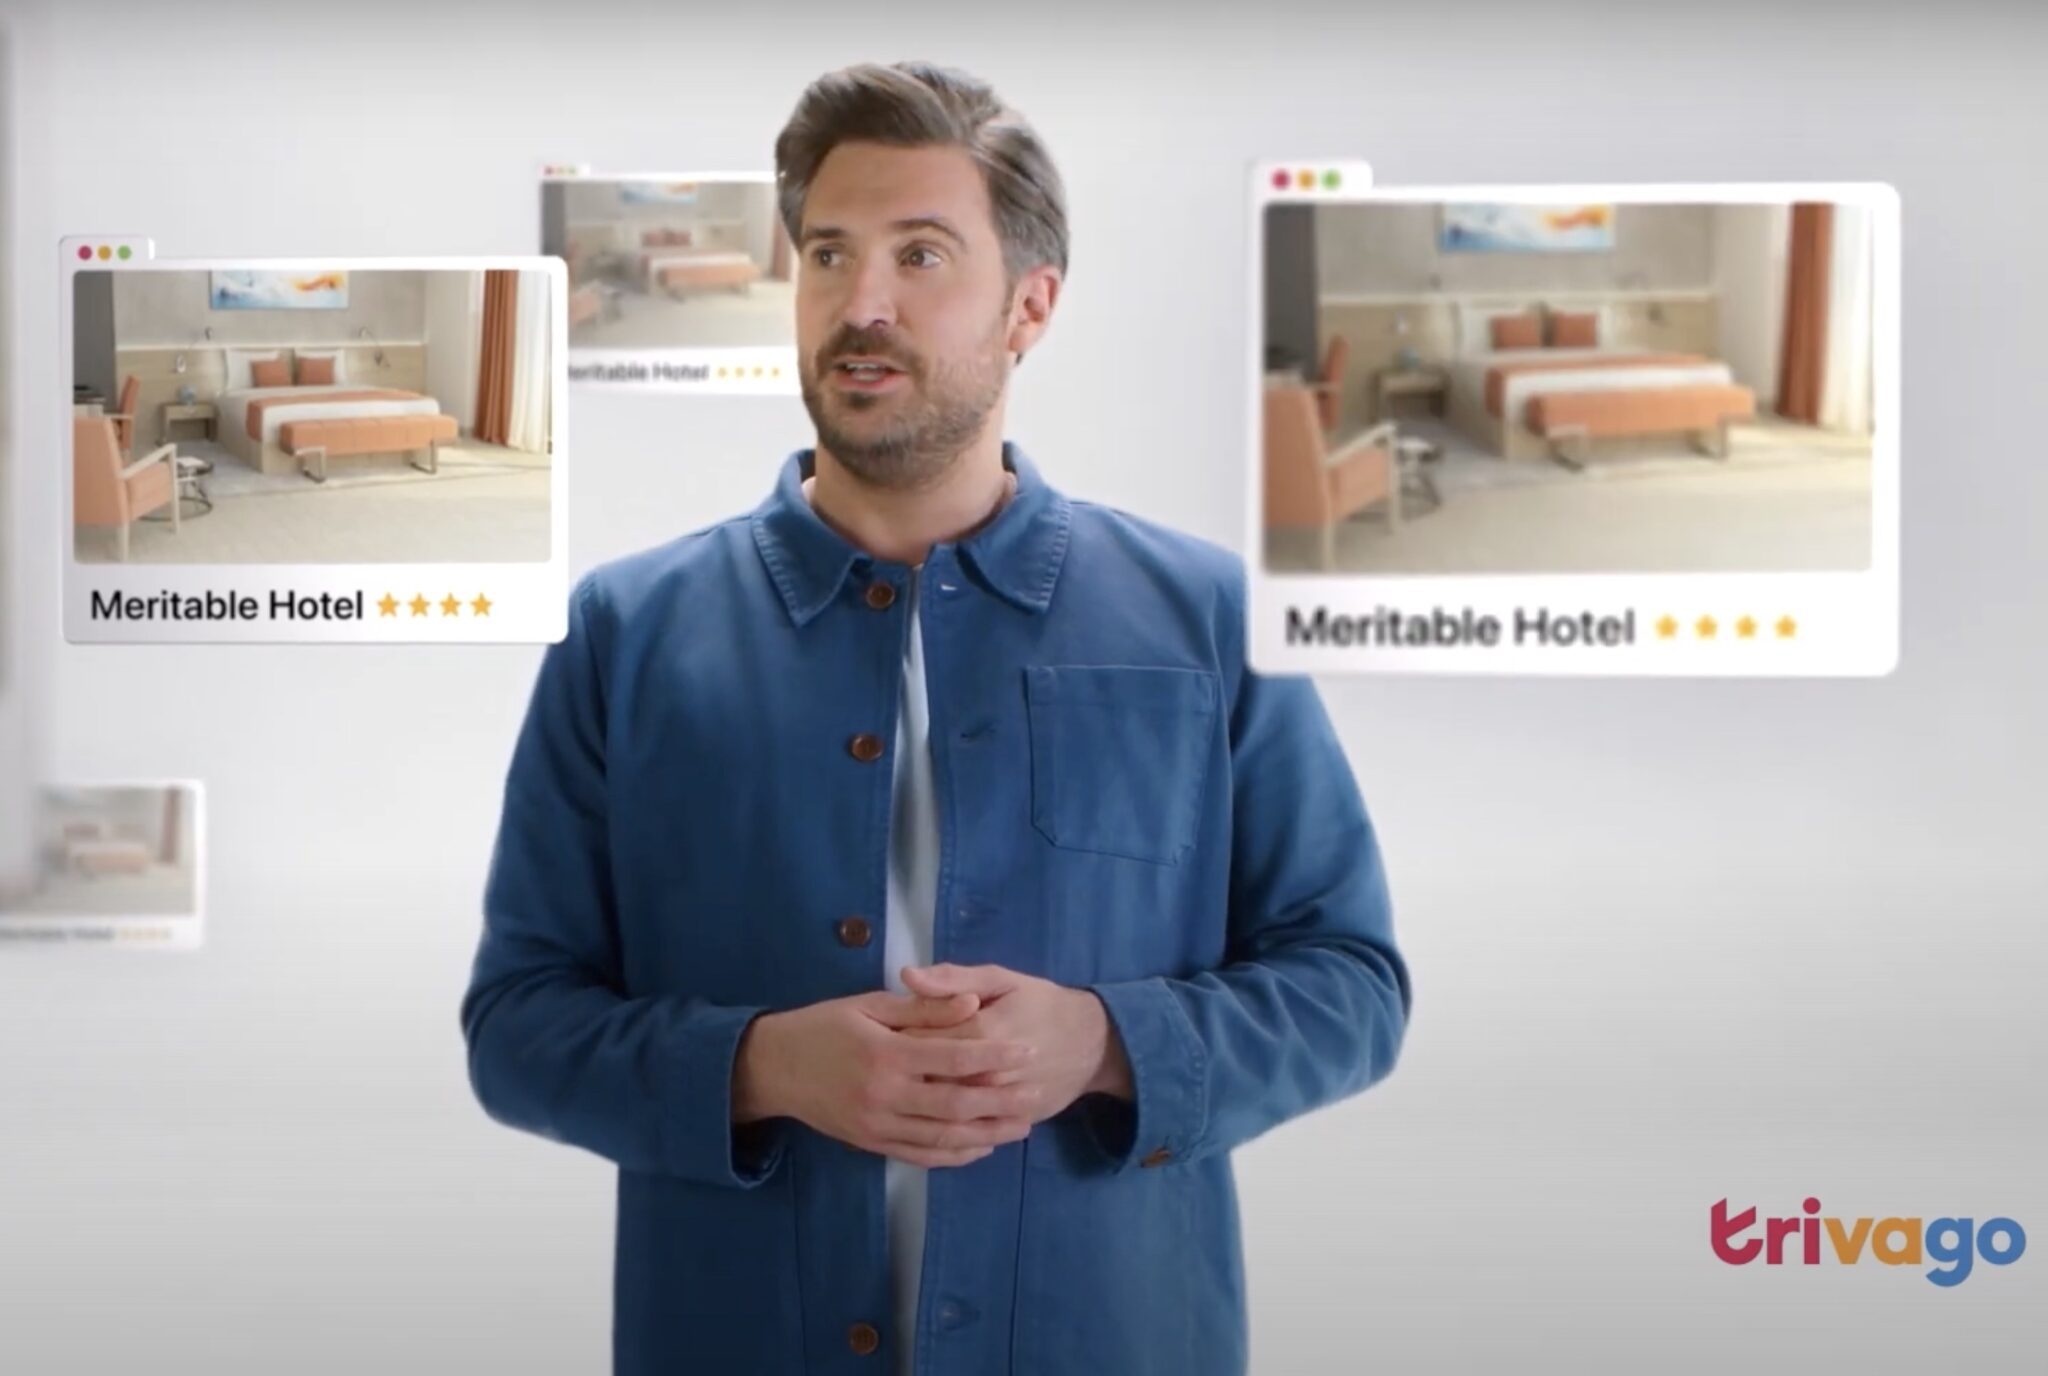 Actor James Sheldon in a new Trivago advertising campaign. Source: Trivago